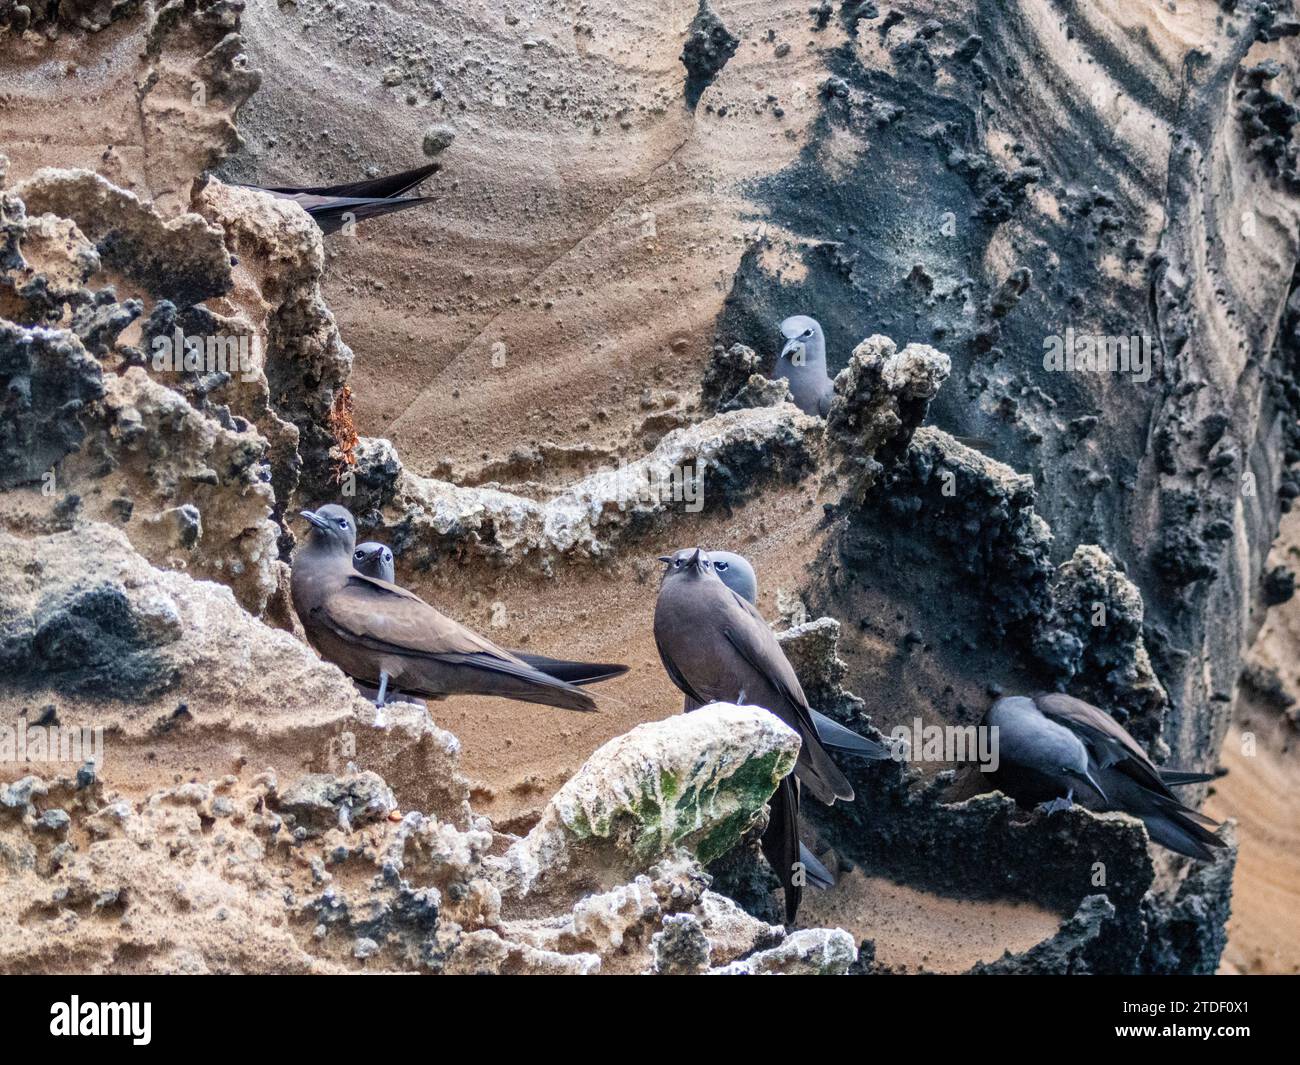 Adult brown noddies (Anous stolidus), on rocky outcropping on Isabela Island, Galapagos Islands, UNESCO World Heritage Site, Ecuador, South America Stock Photo